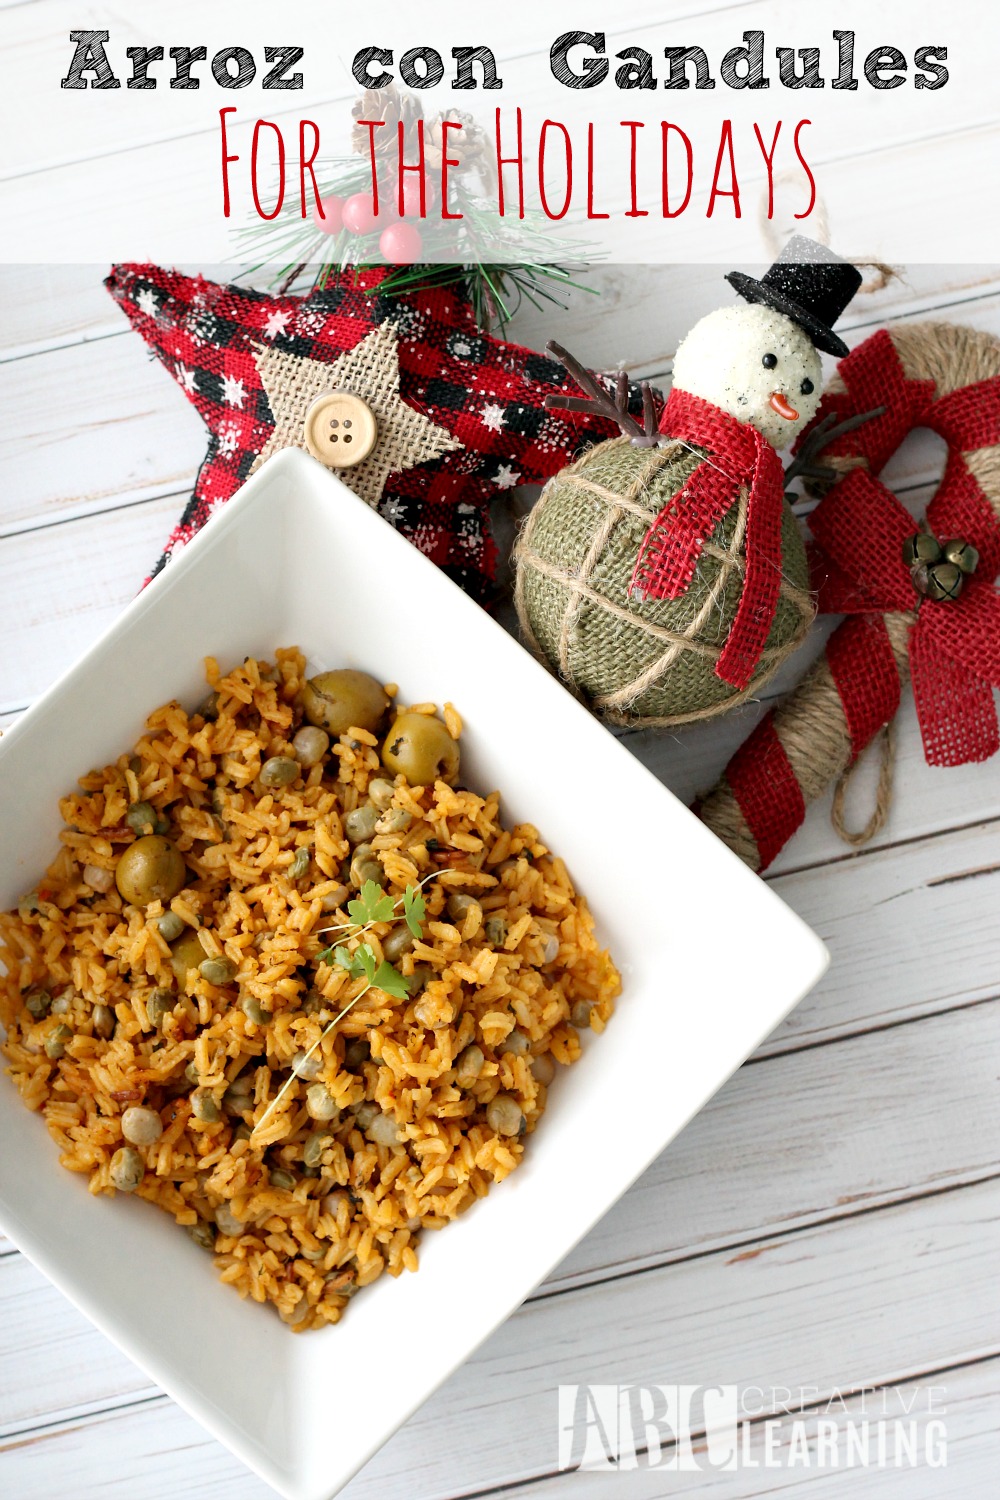 Traditional Arroz con Gandules for the Holidays